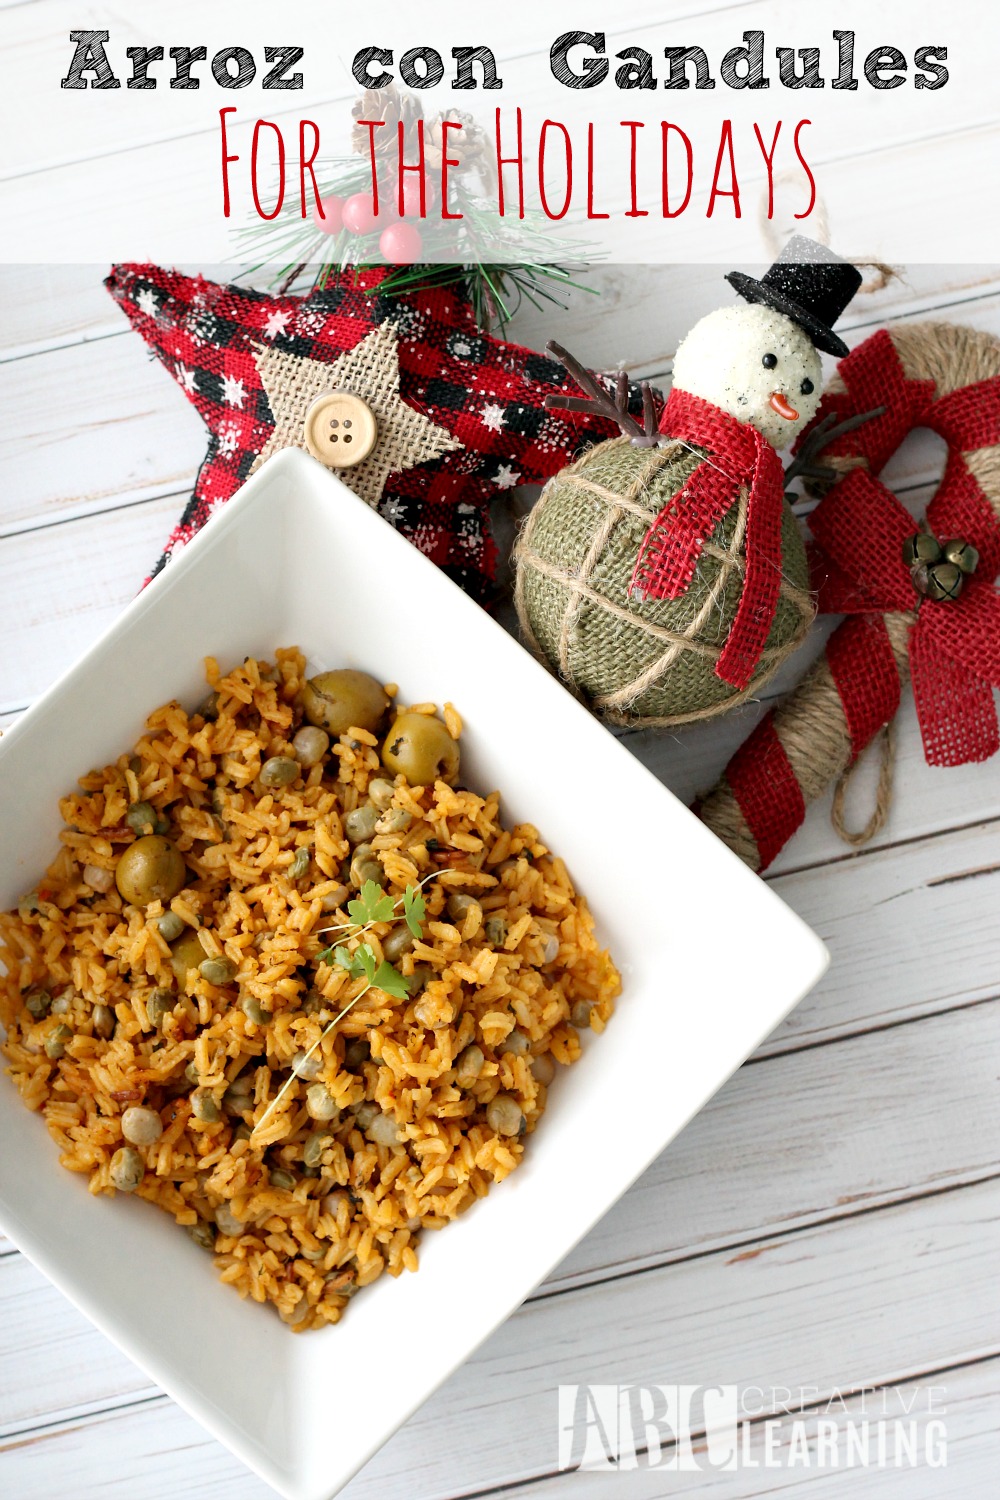 Traditional Arroz con Gandules for the Holidays